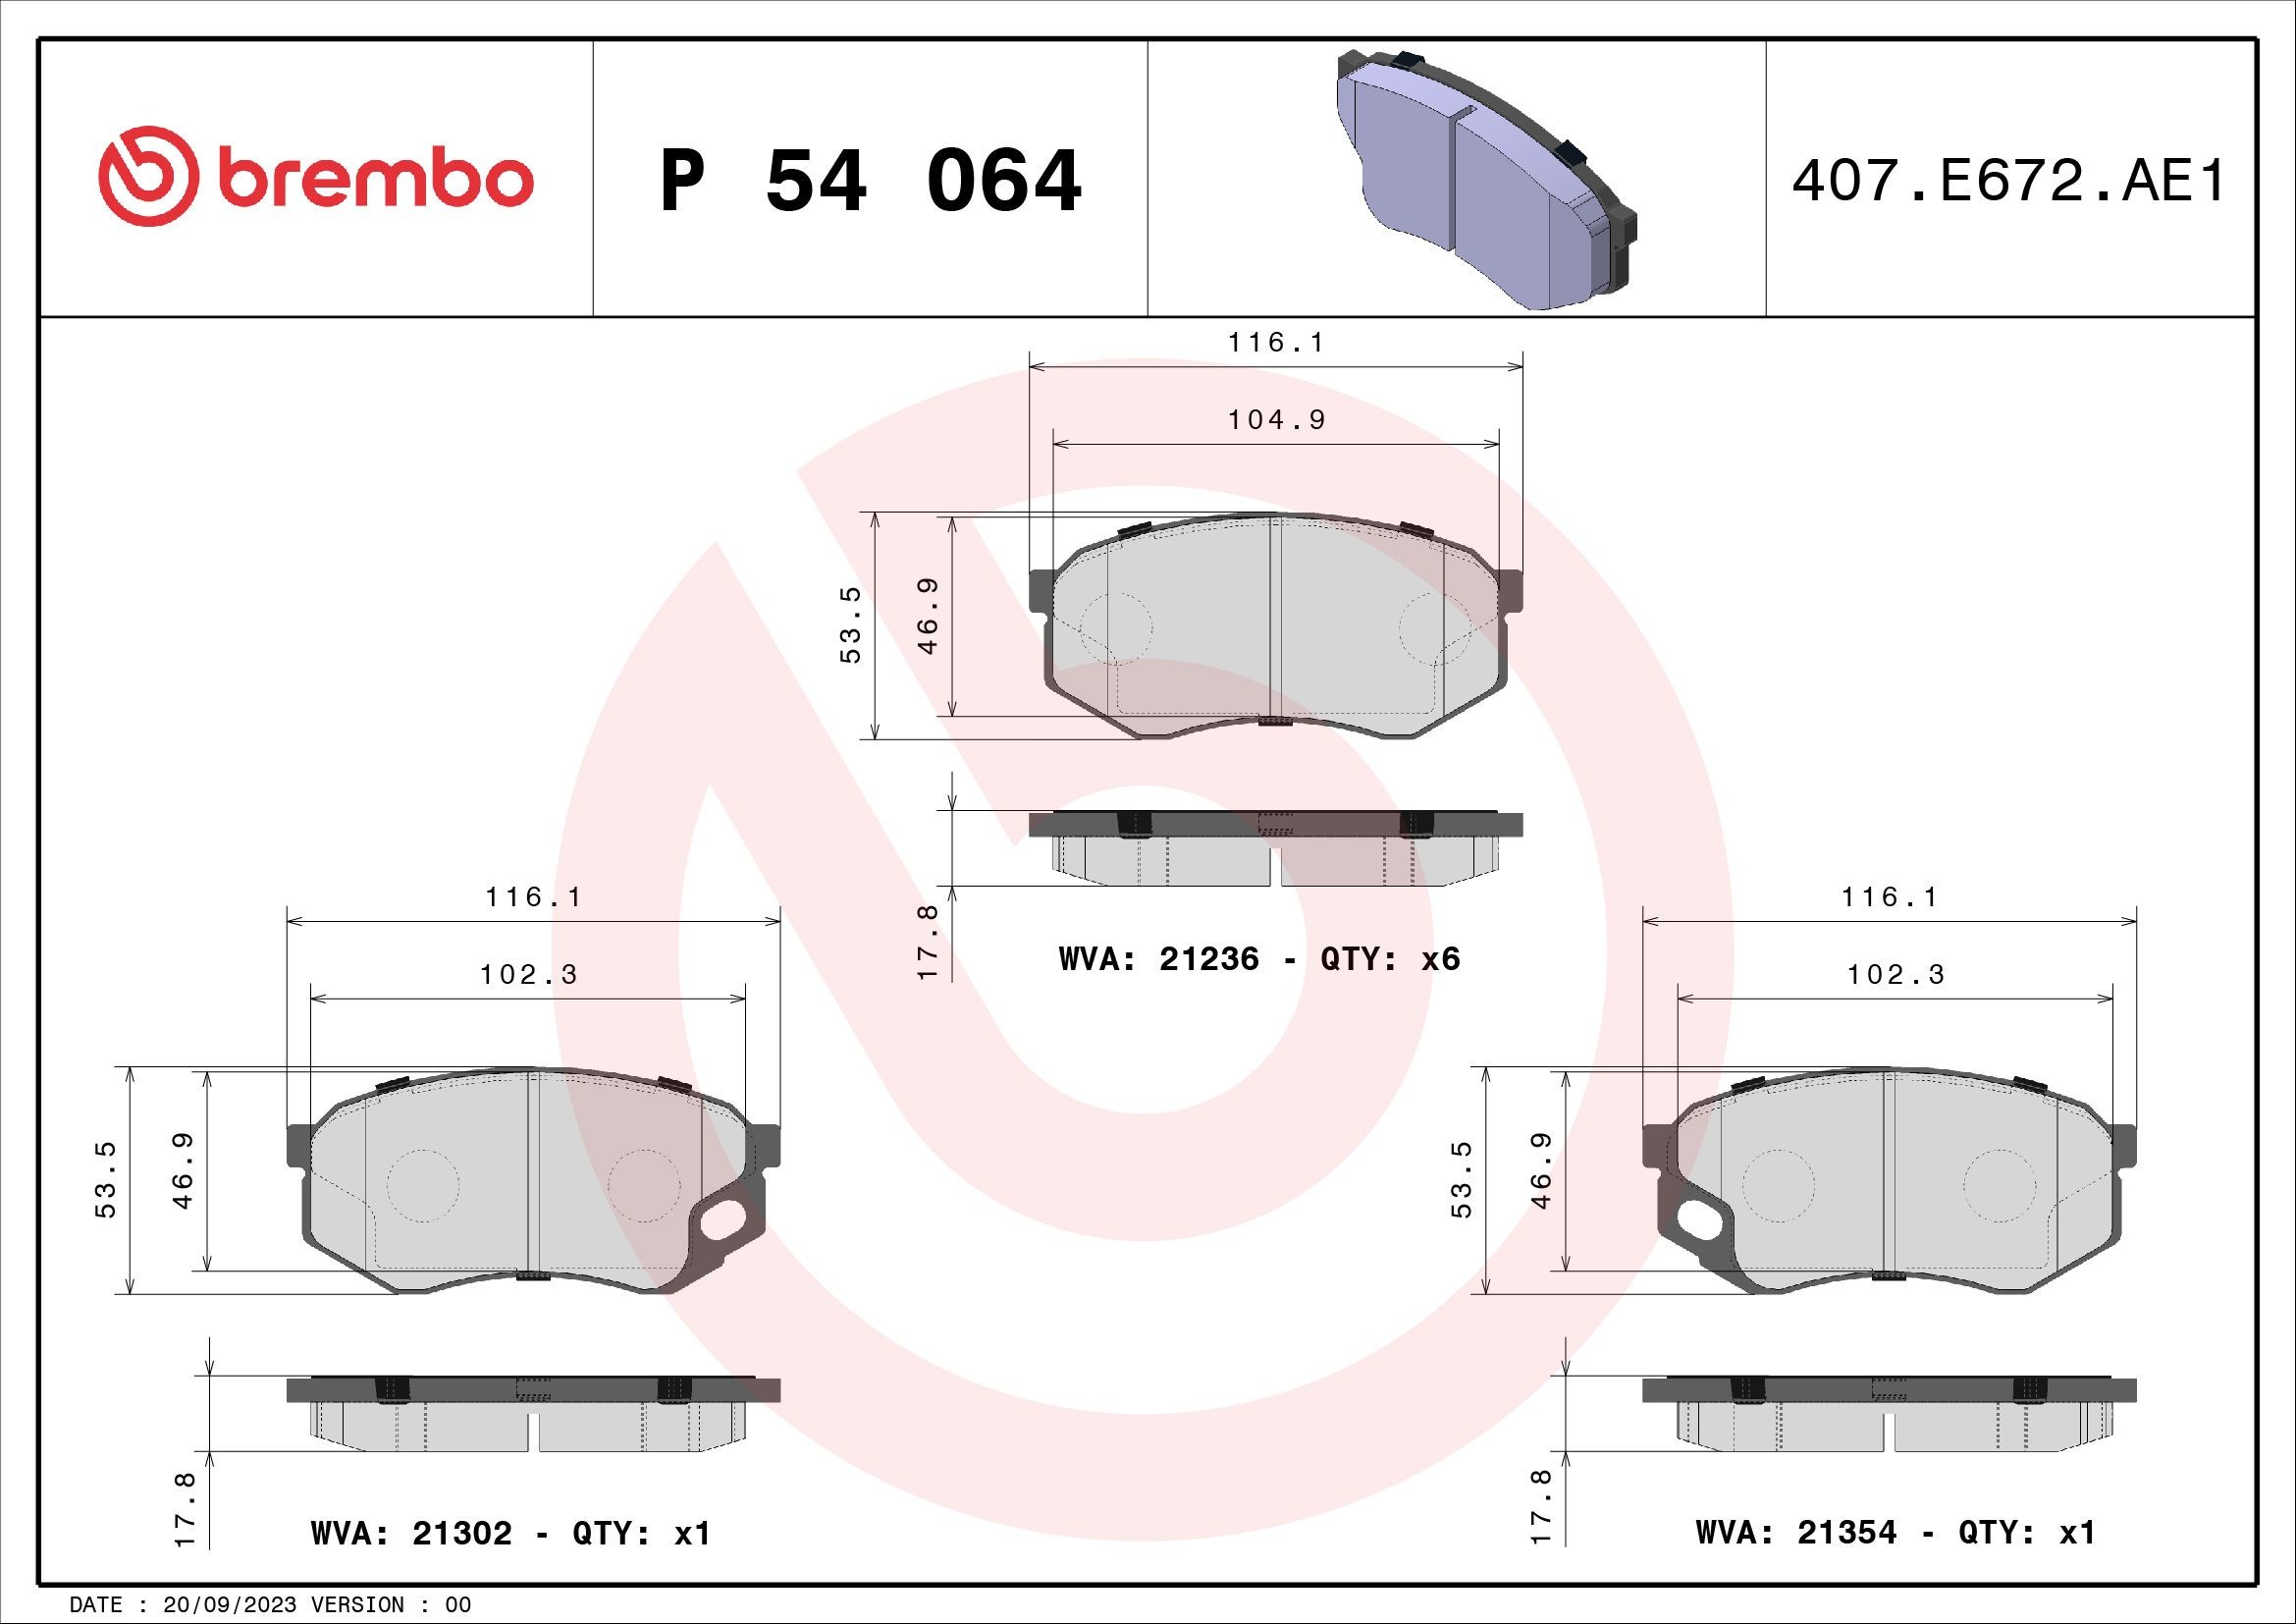 BREMBO P 54 064 Brake pad set excl. wear warning contact, with accessories